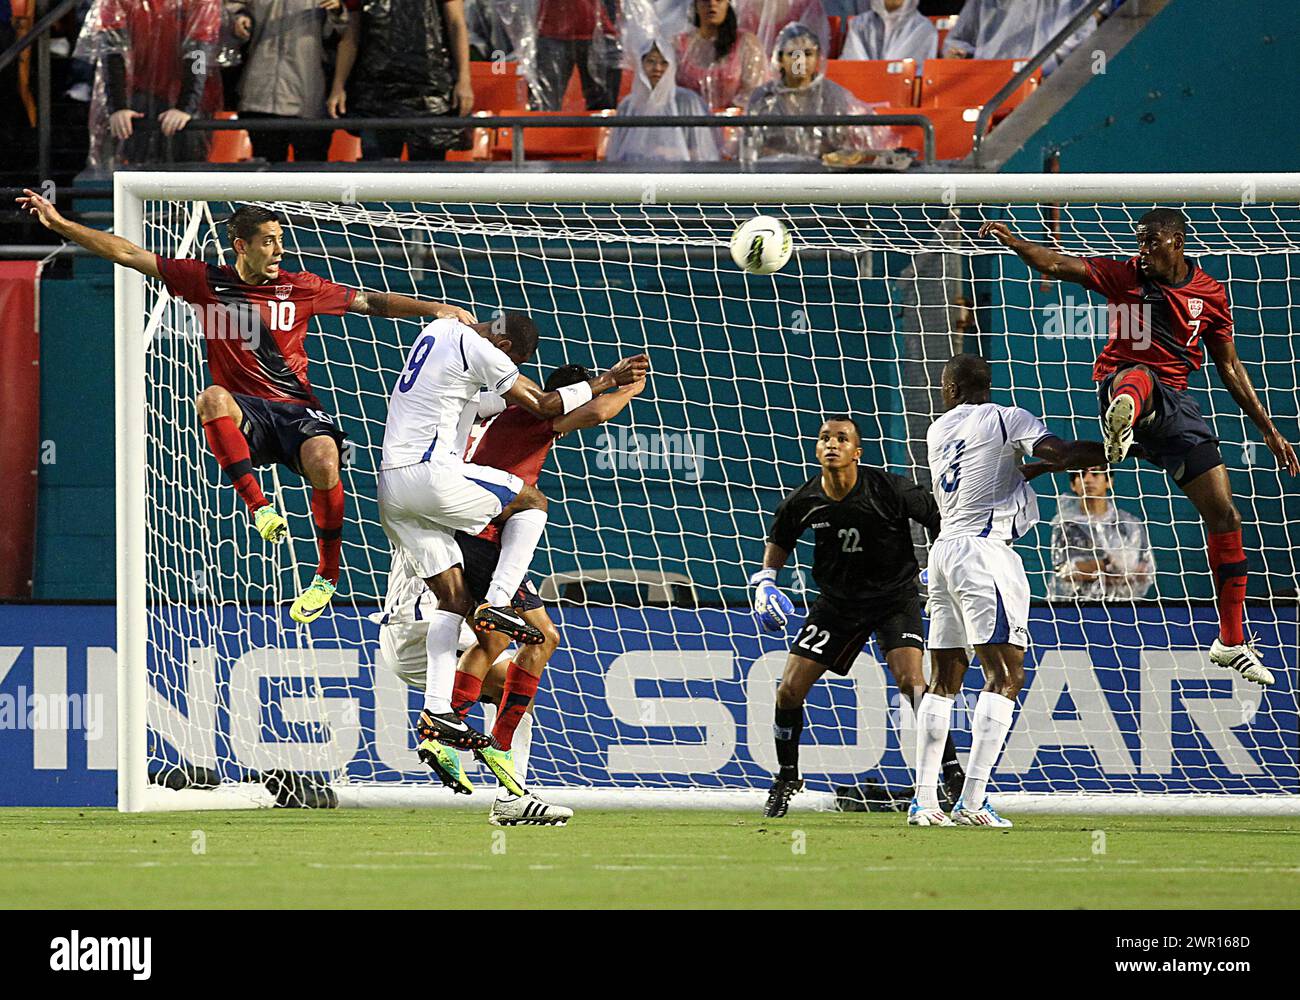 OCTOBER 08 2011: Clint Dempsey (10) and Maurice Edu (7) of the USA MNT moves the ball over Jerry Bengston (9) of the Honduras MNT during an international friendly match at Sun Life Stadium, in Miami, Florida. USA won 1-0. Stock Photo